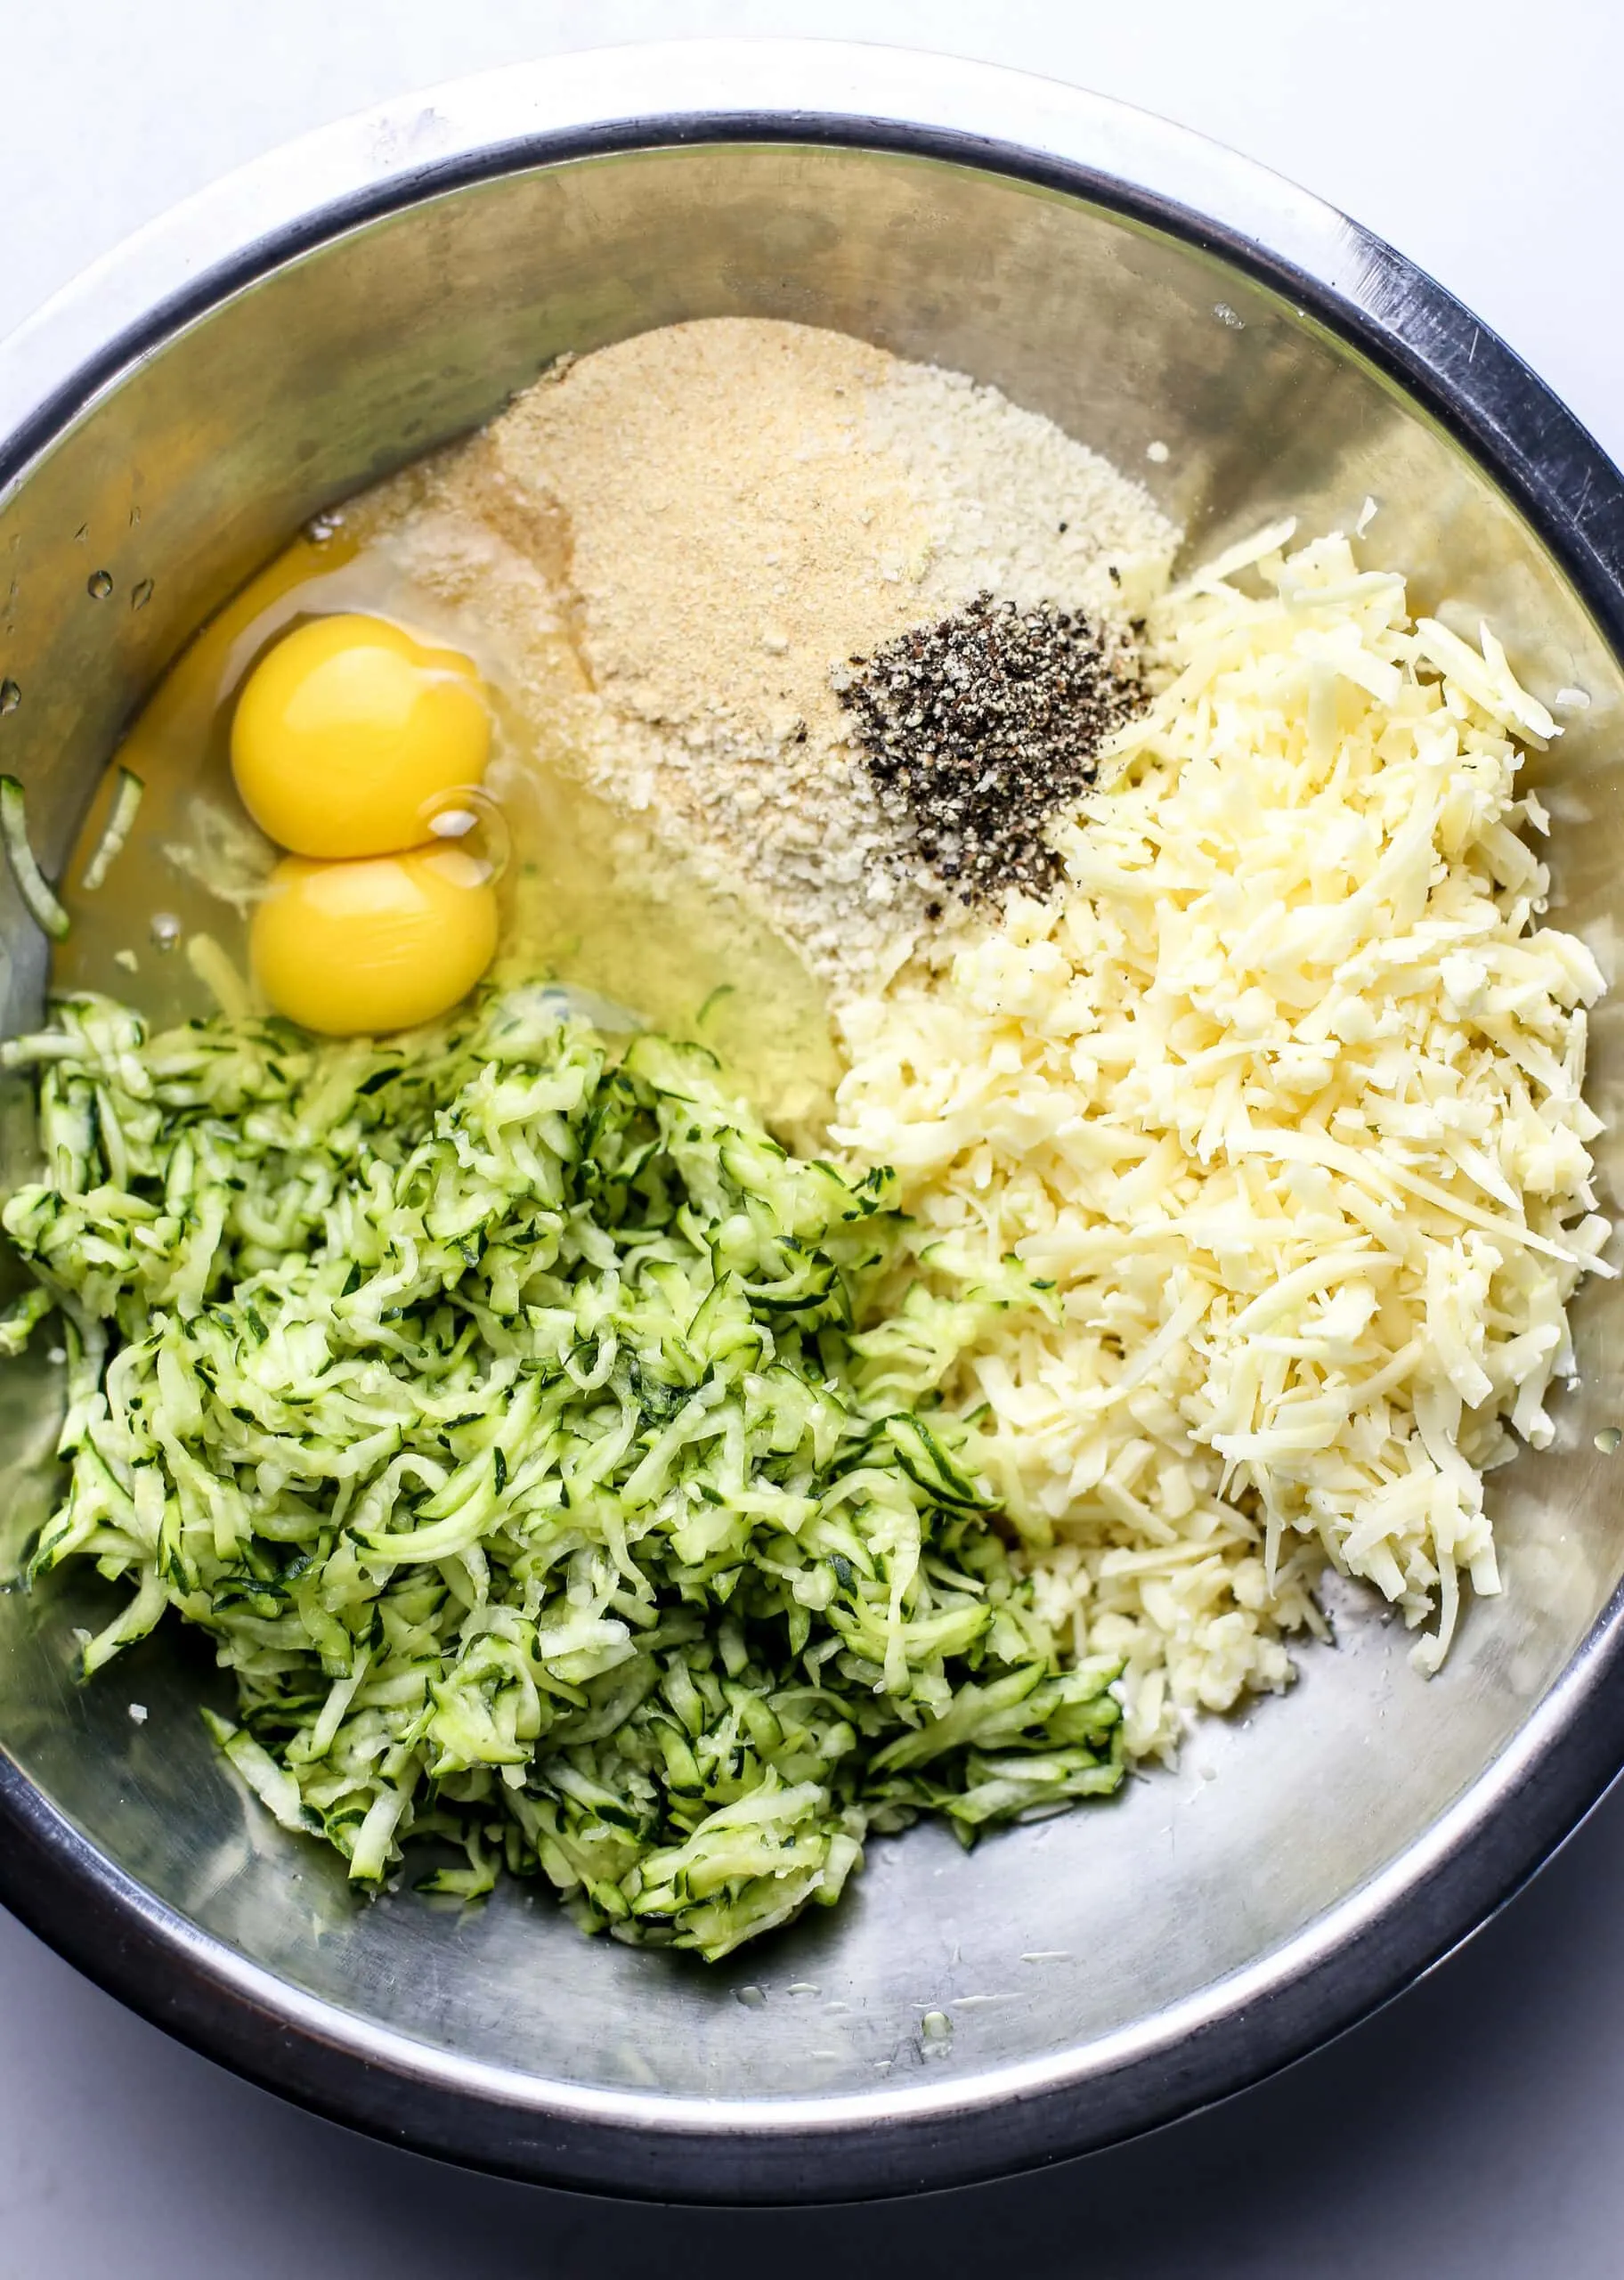 Zucchini bite ingredients in a stainless steel bowl.